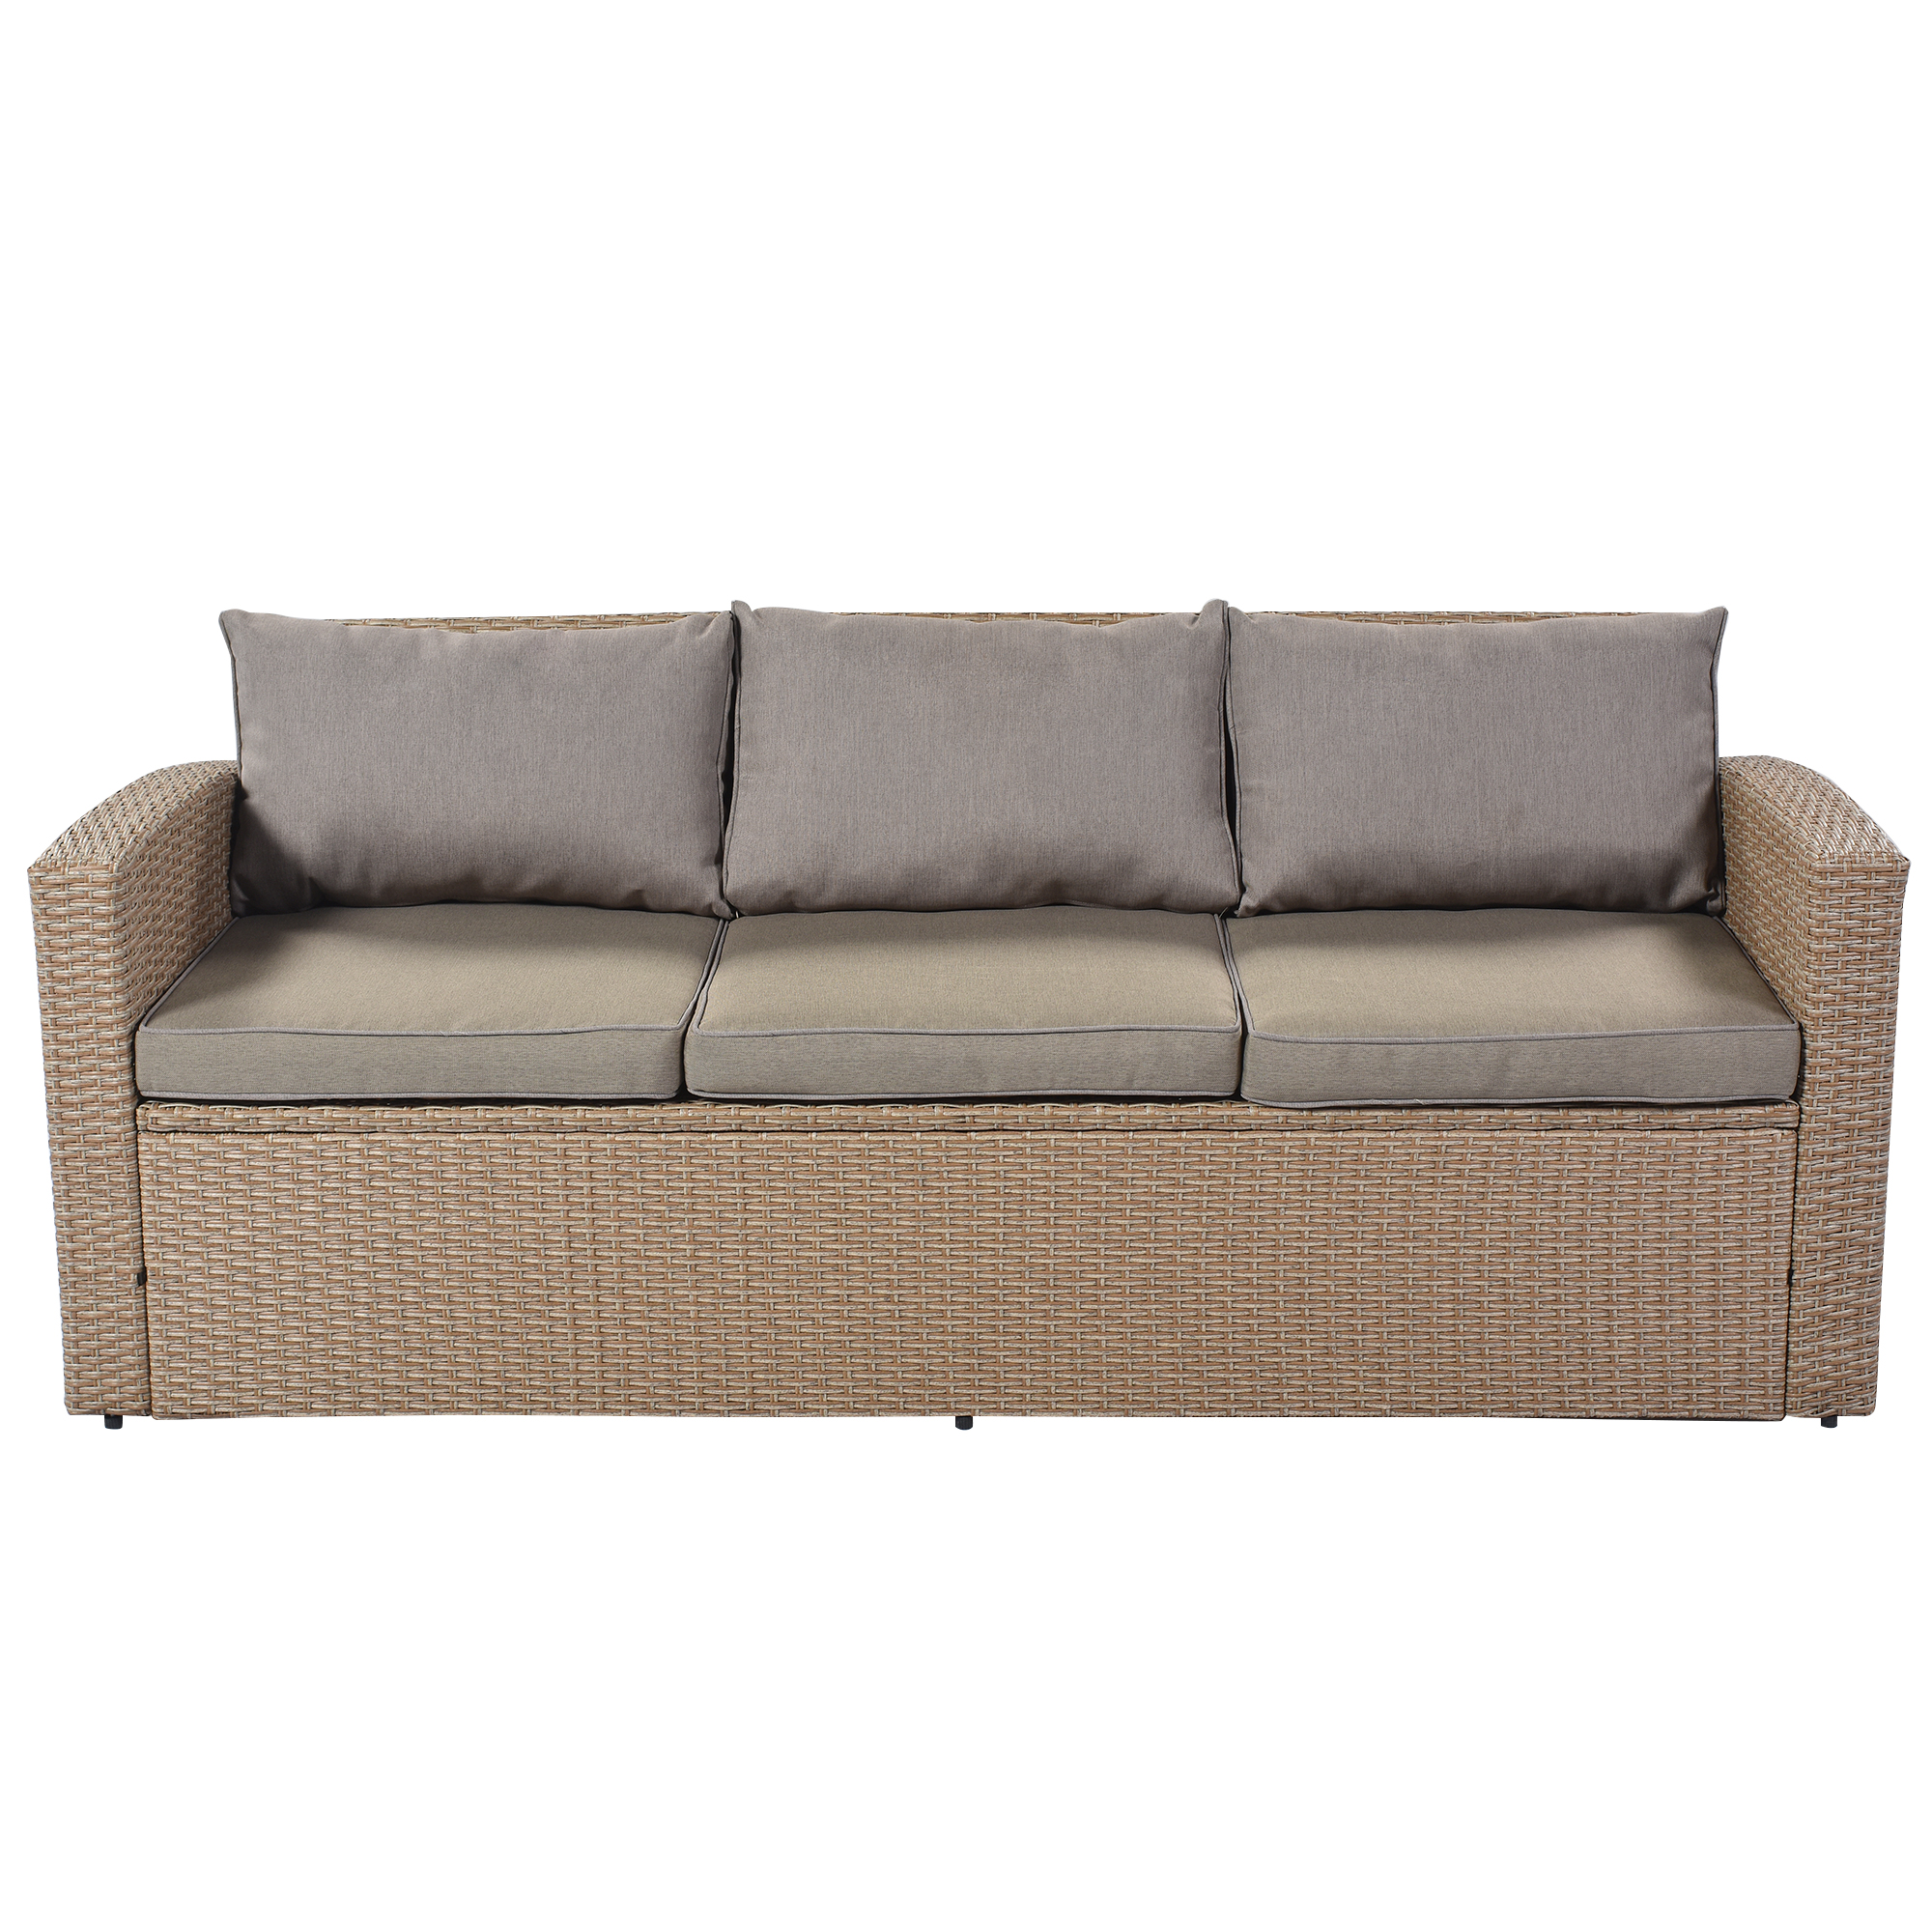 4-Piece Wicker Furniture Sofa Set with Cushions - WY000261AAE